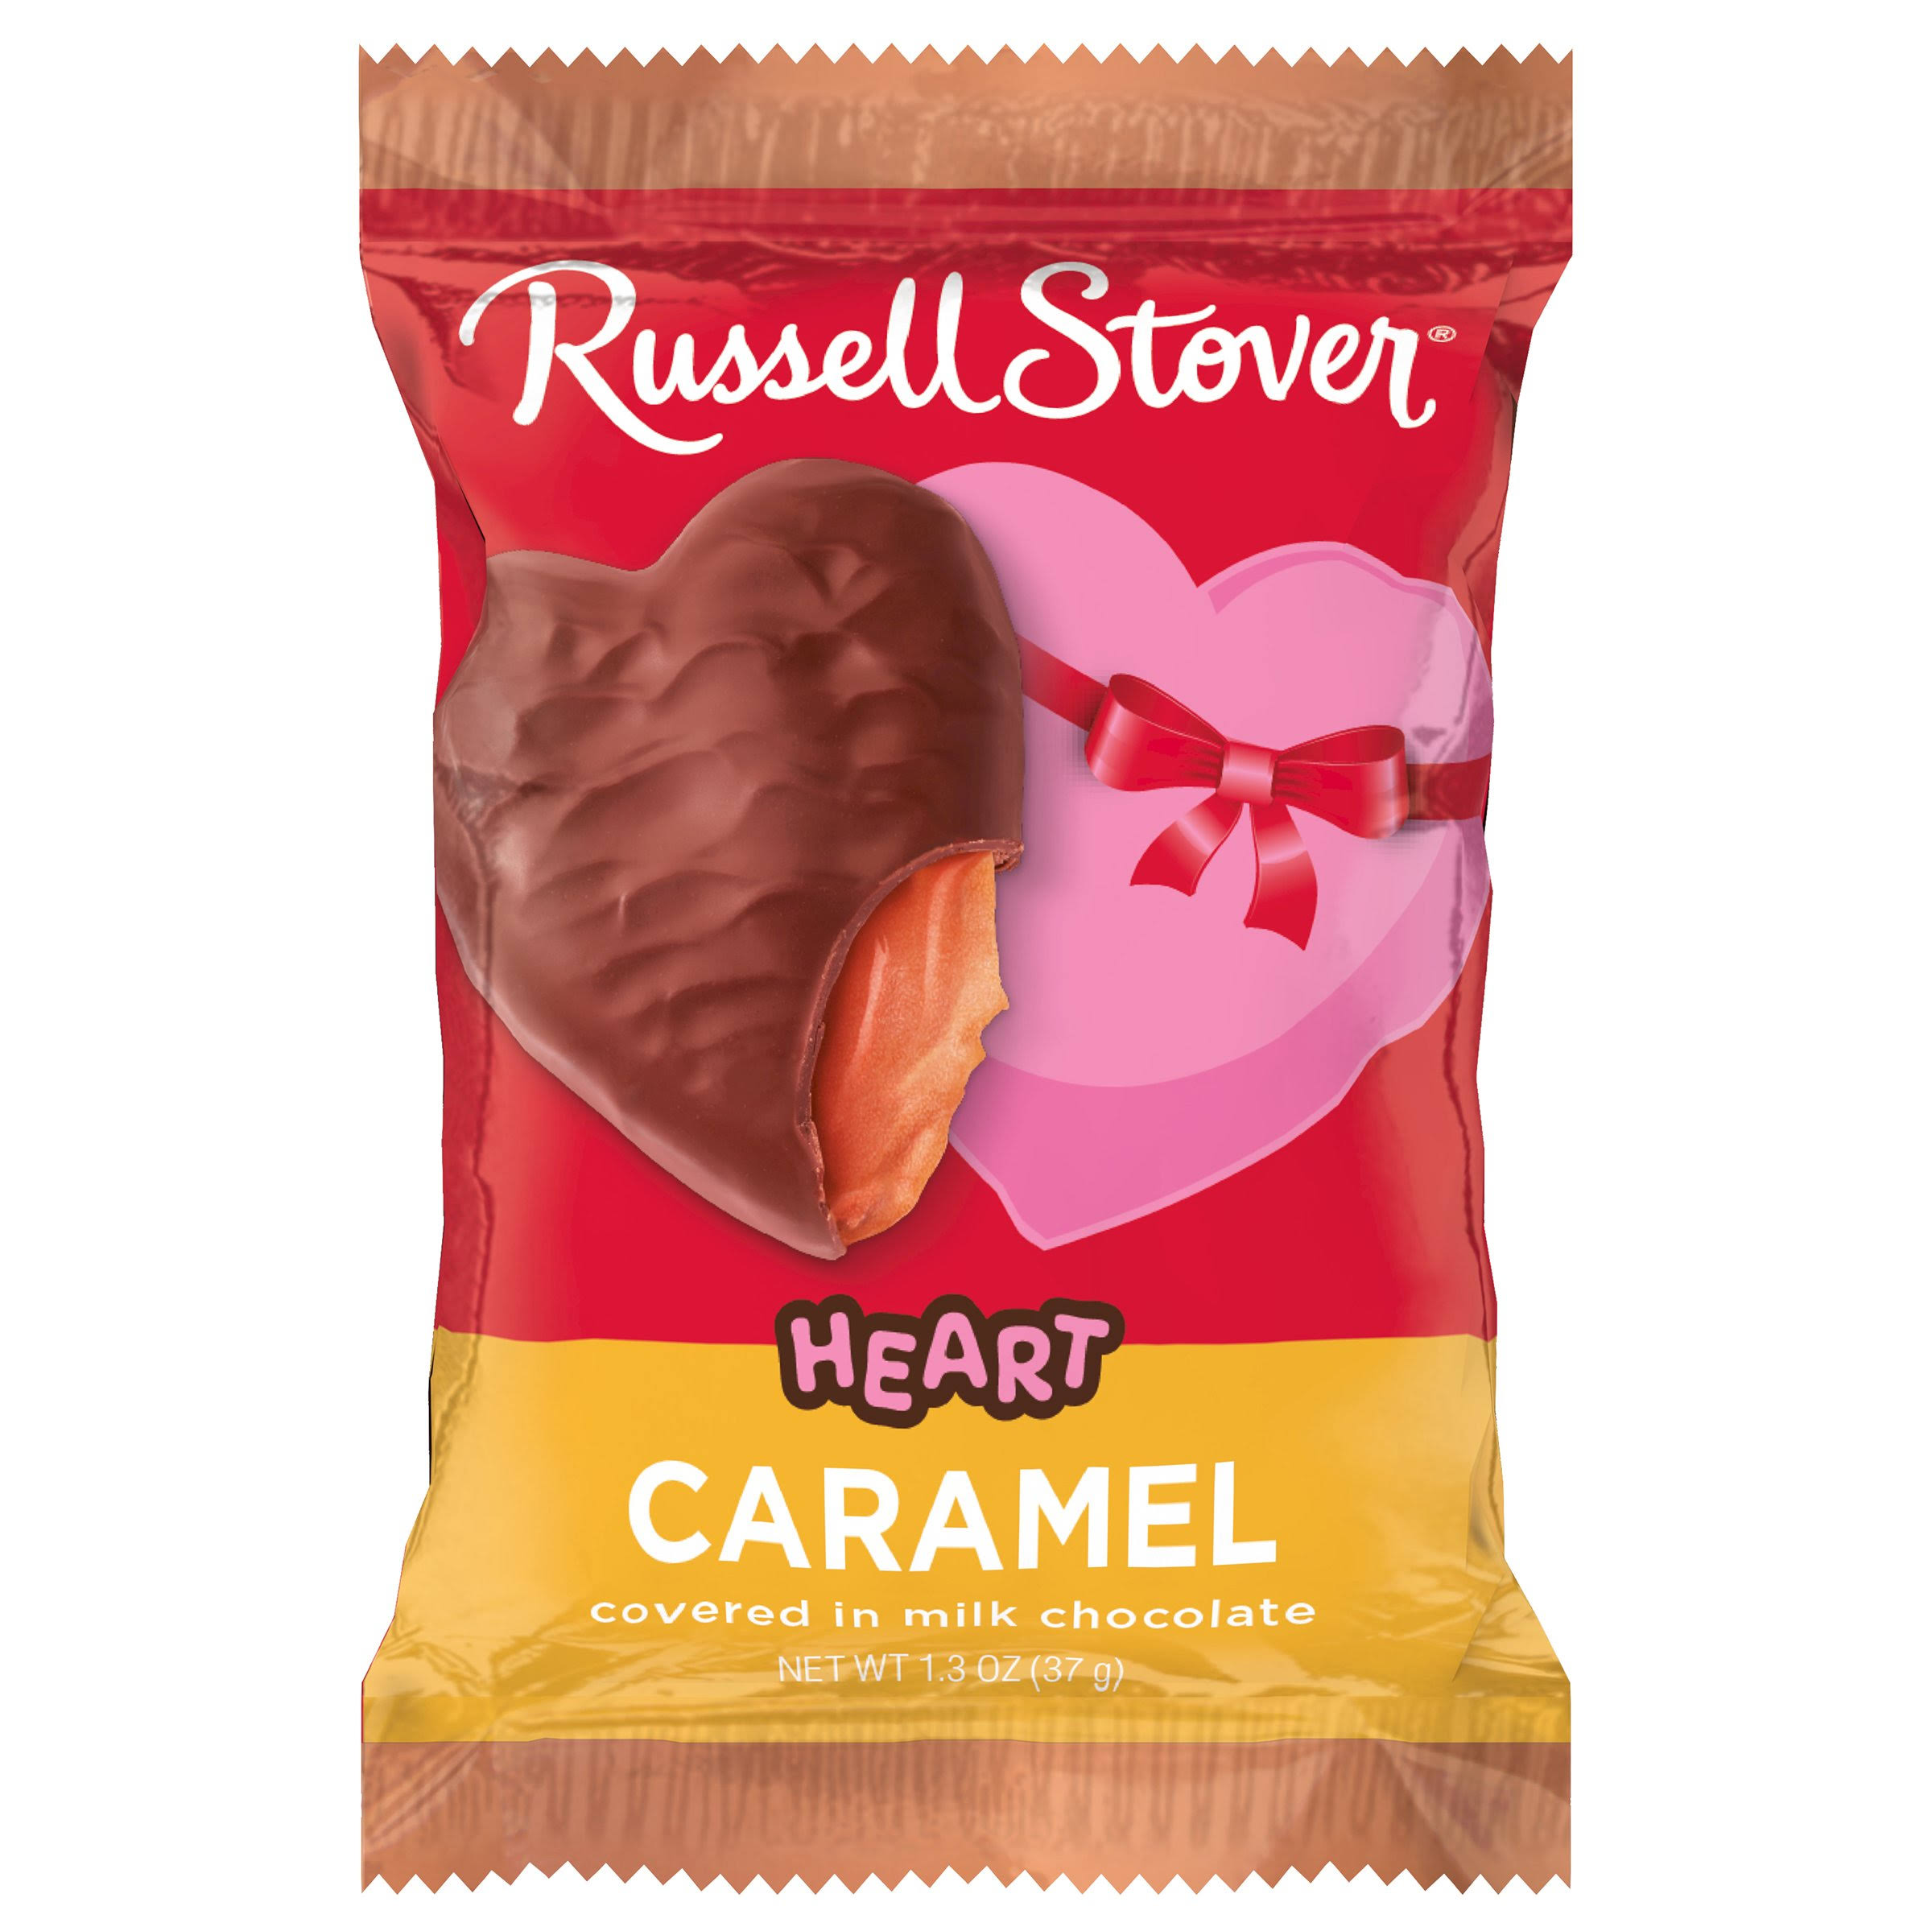 Russell Stover Milk Chocolate Caramel Heart, 1.3 oz.